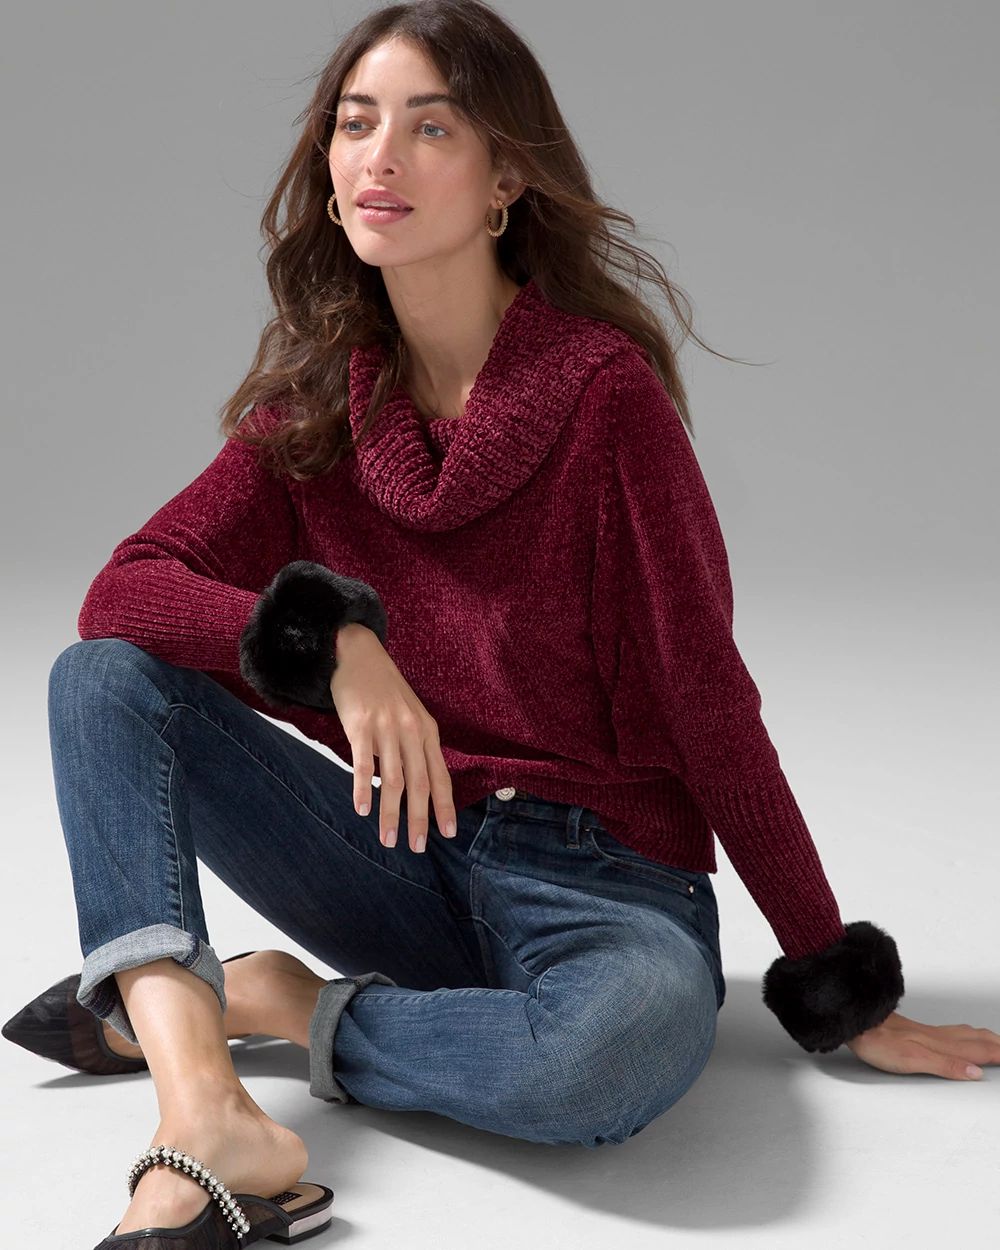 Cowl Neck Chenille Sweater click to view larger image.